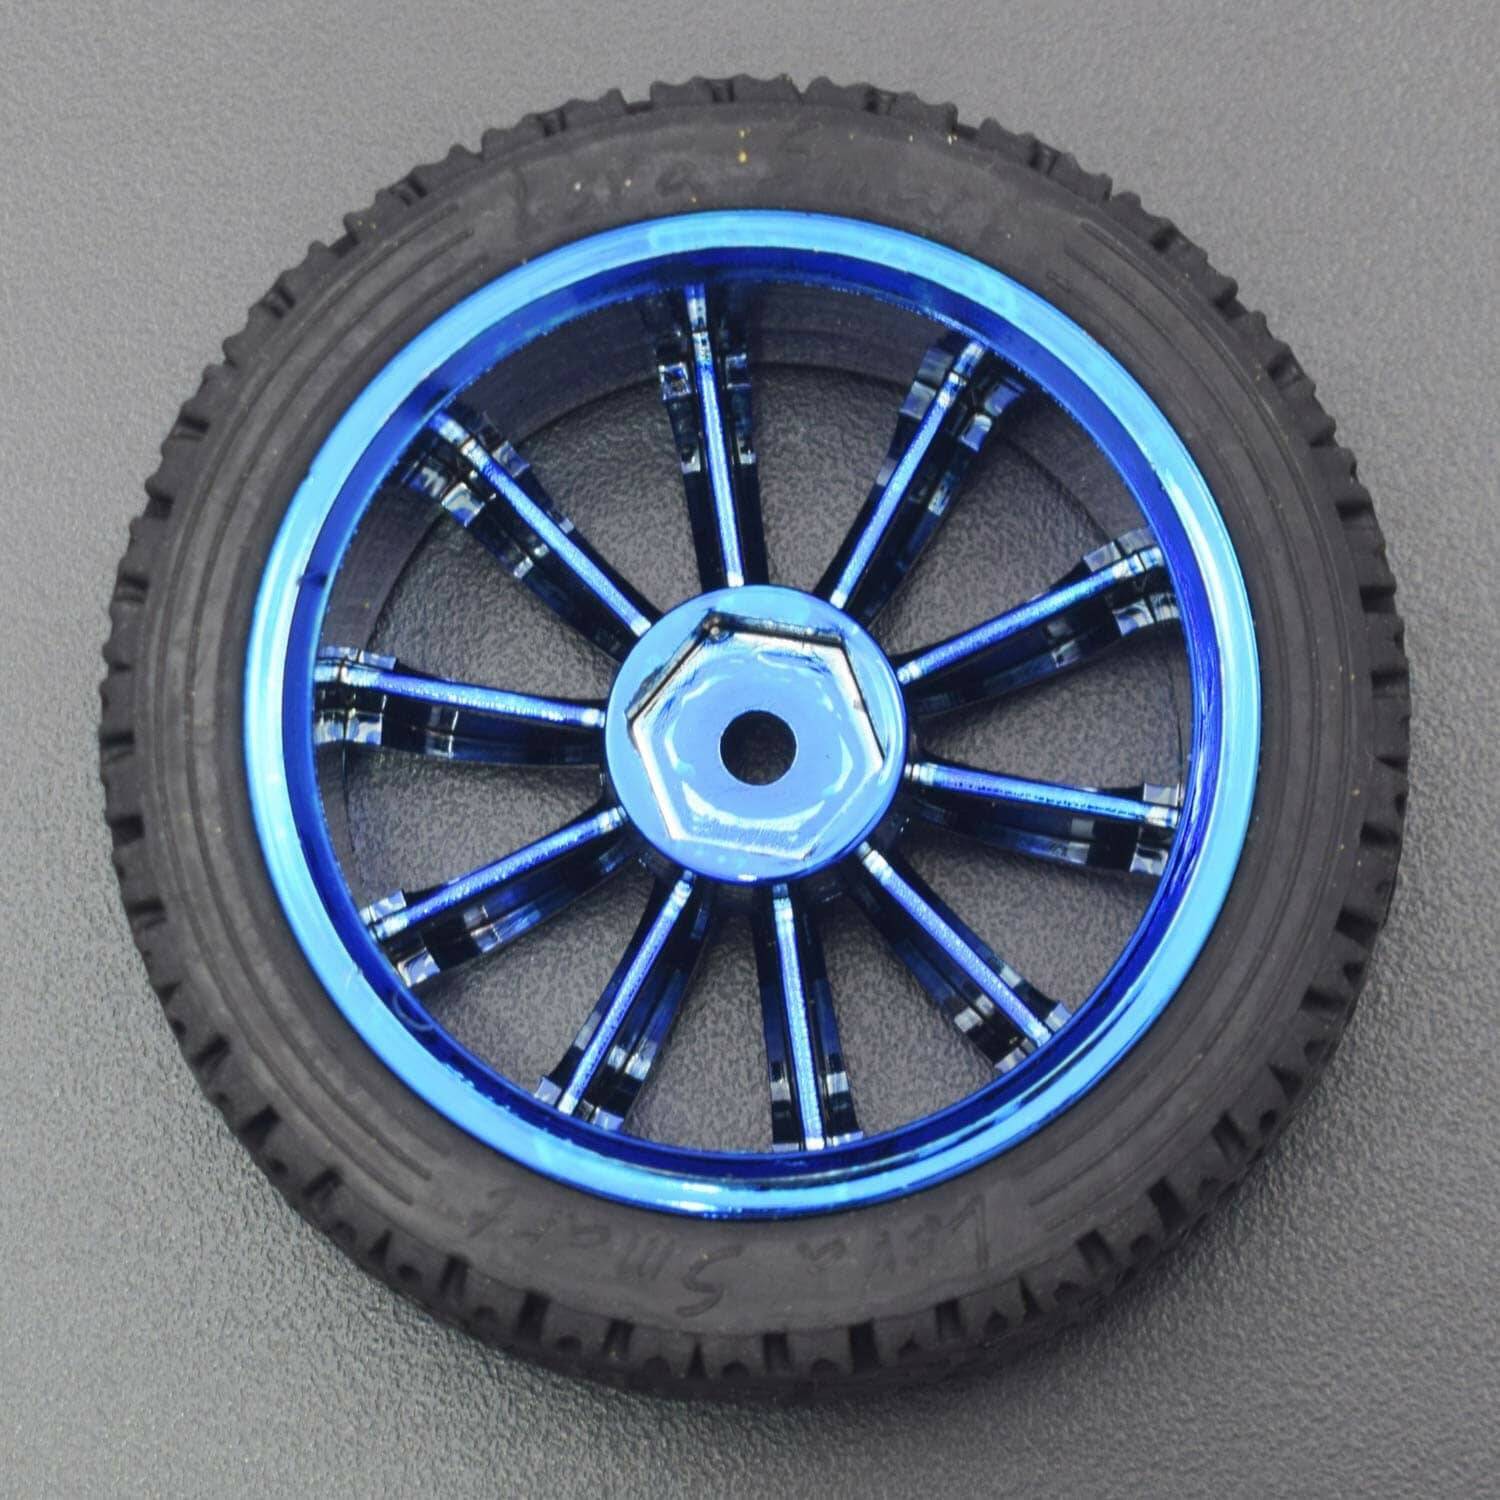 65mm Plastic Wheels Blue for The Robot, Smart car, Smart Vehicles, Parts for DIY (4 Pieces) - RS1917 - REES52